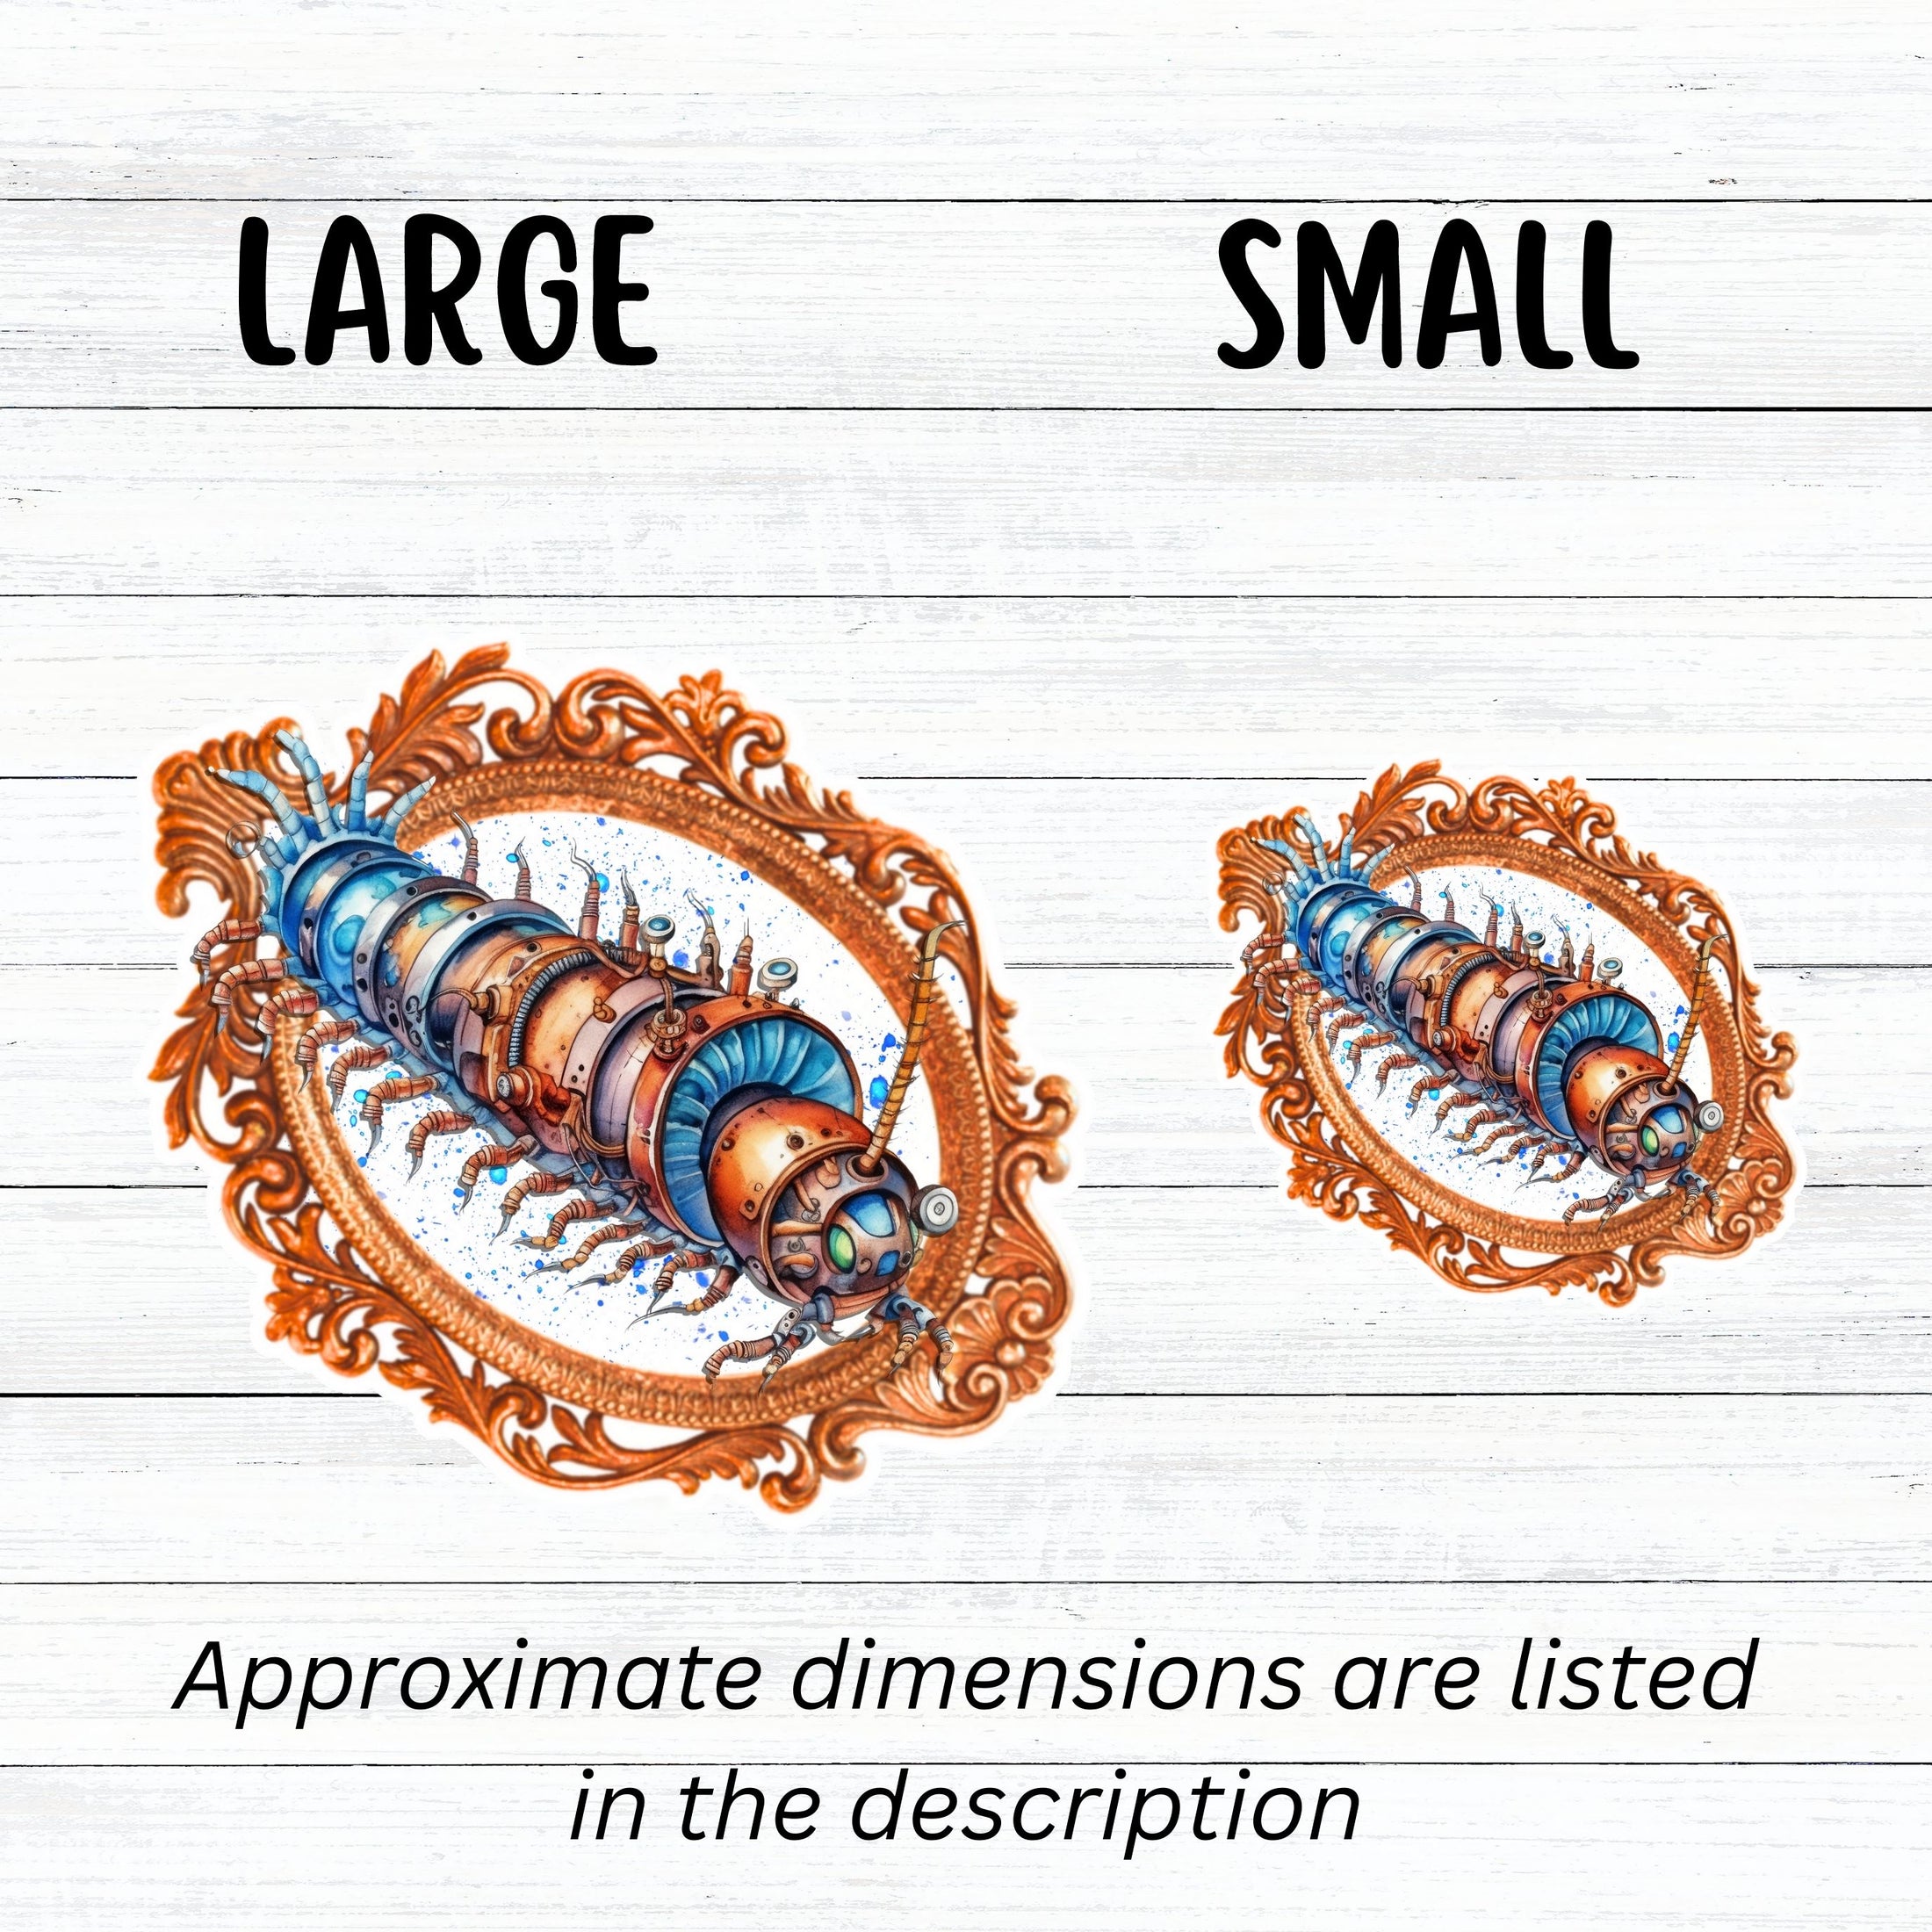 This image shows large and small steampunk centipede stickers next to each other.